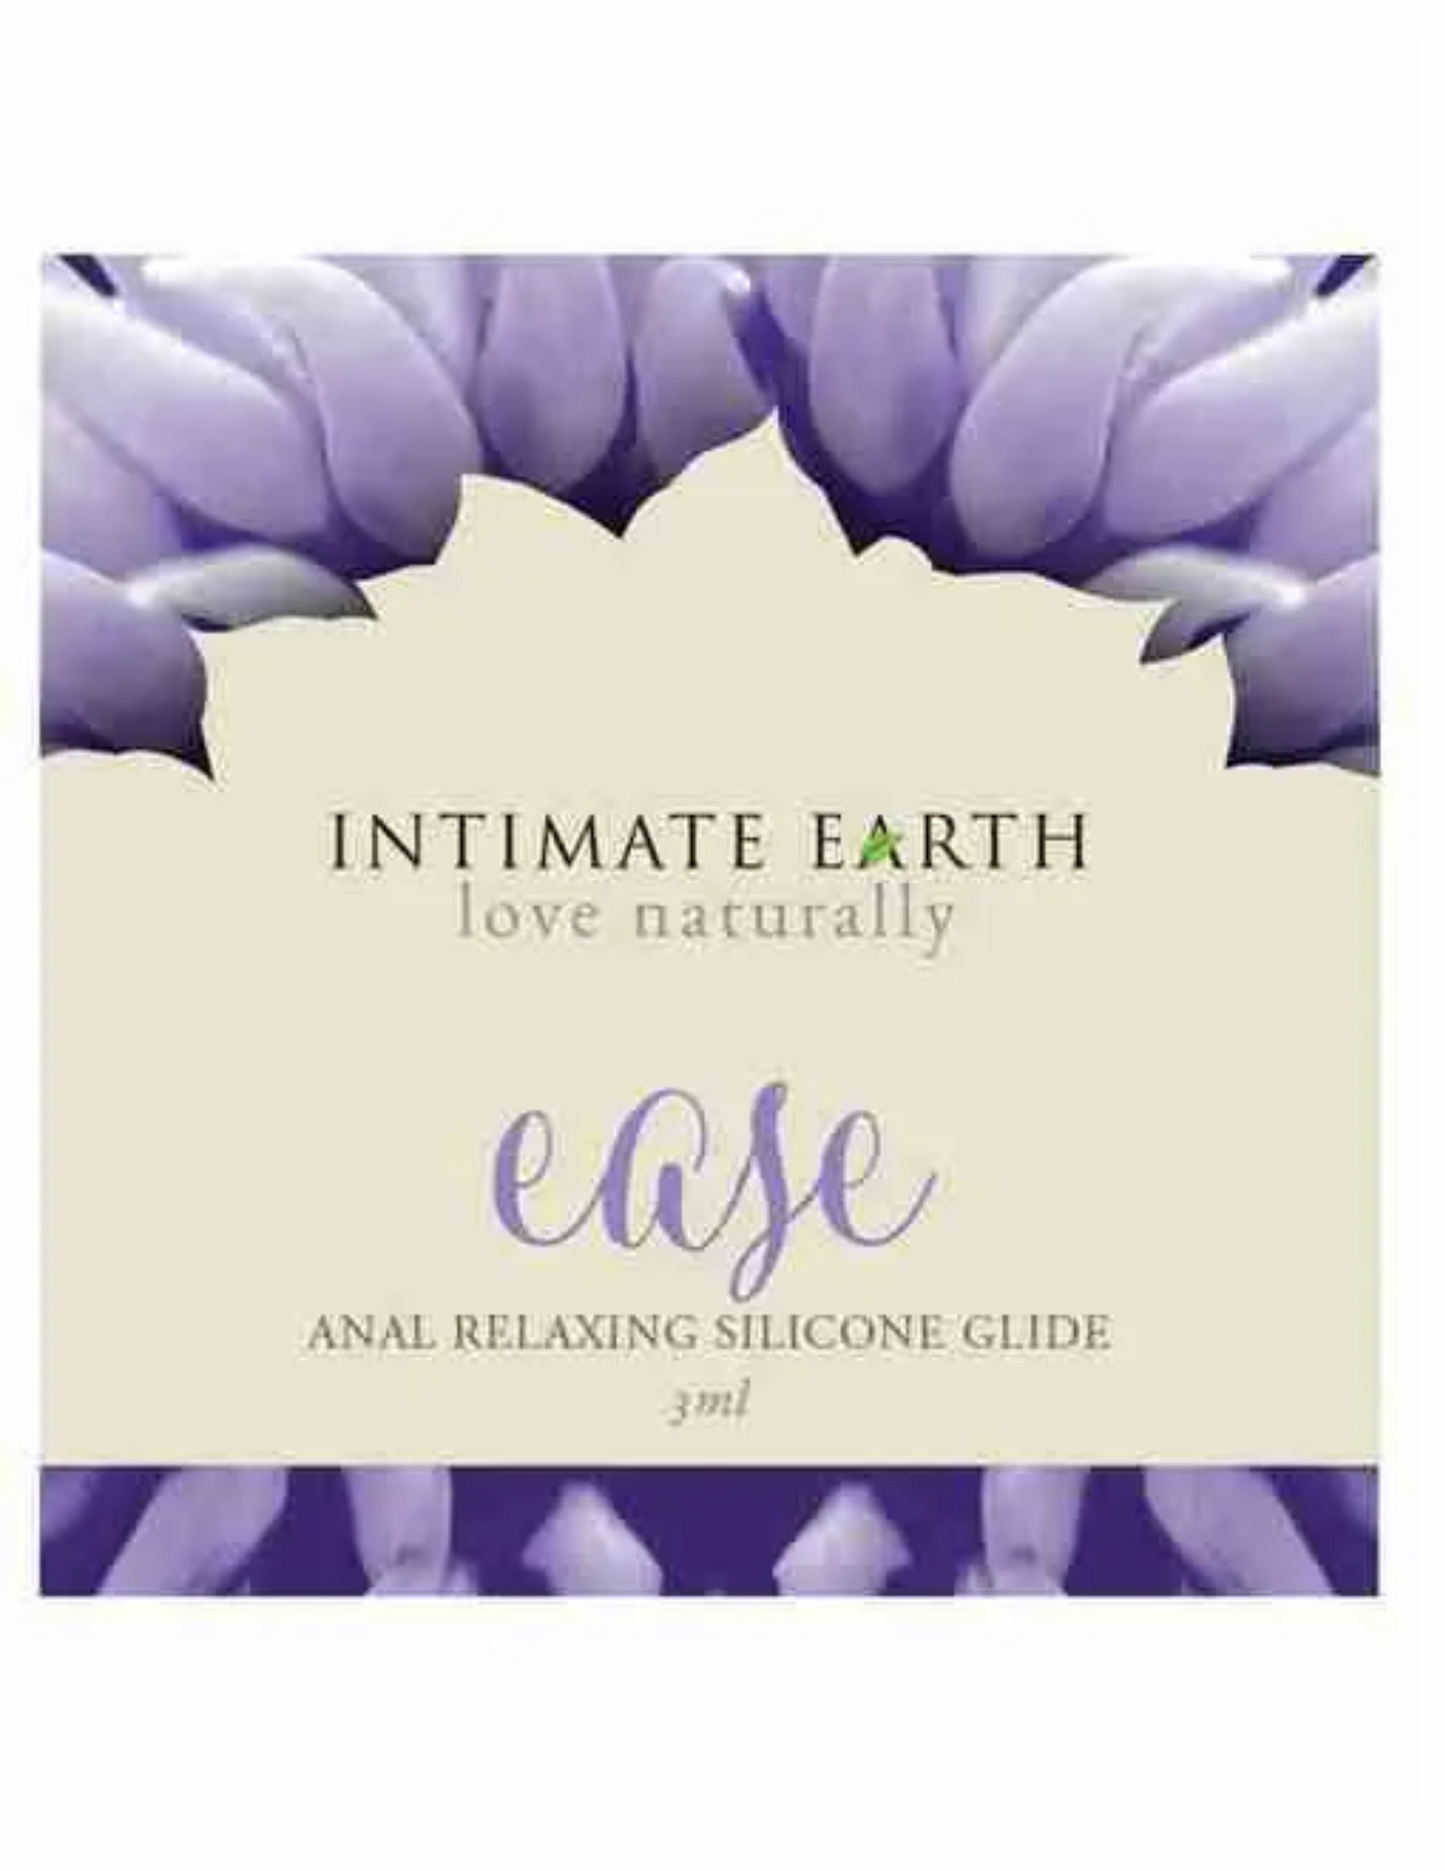 Intimate Earth Ease Relaxing Anal Silicone Glide Lubricant sample size.